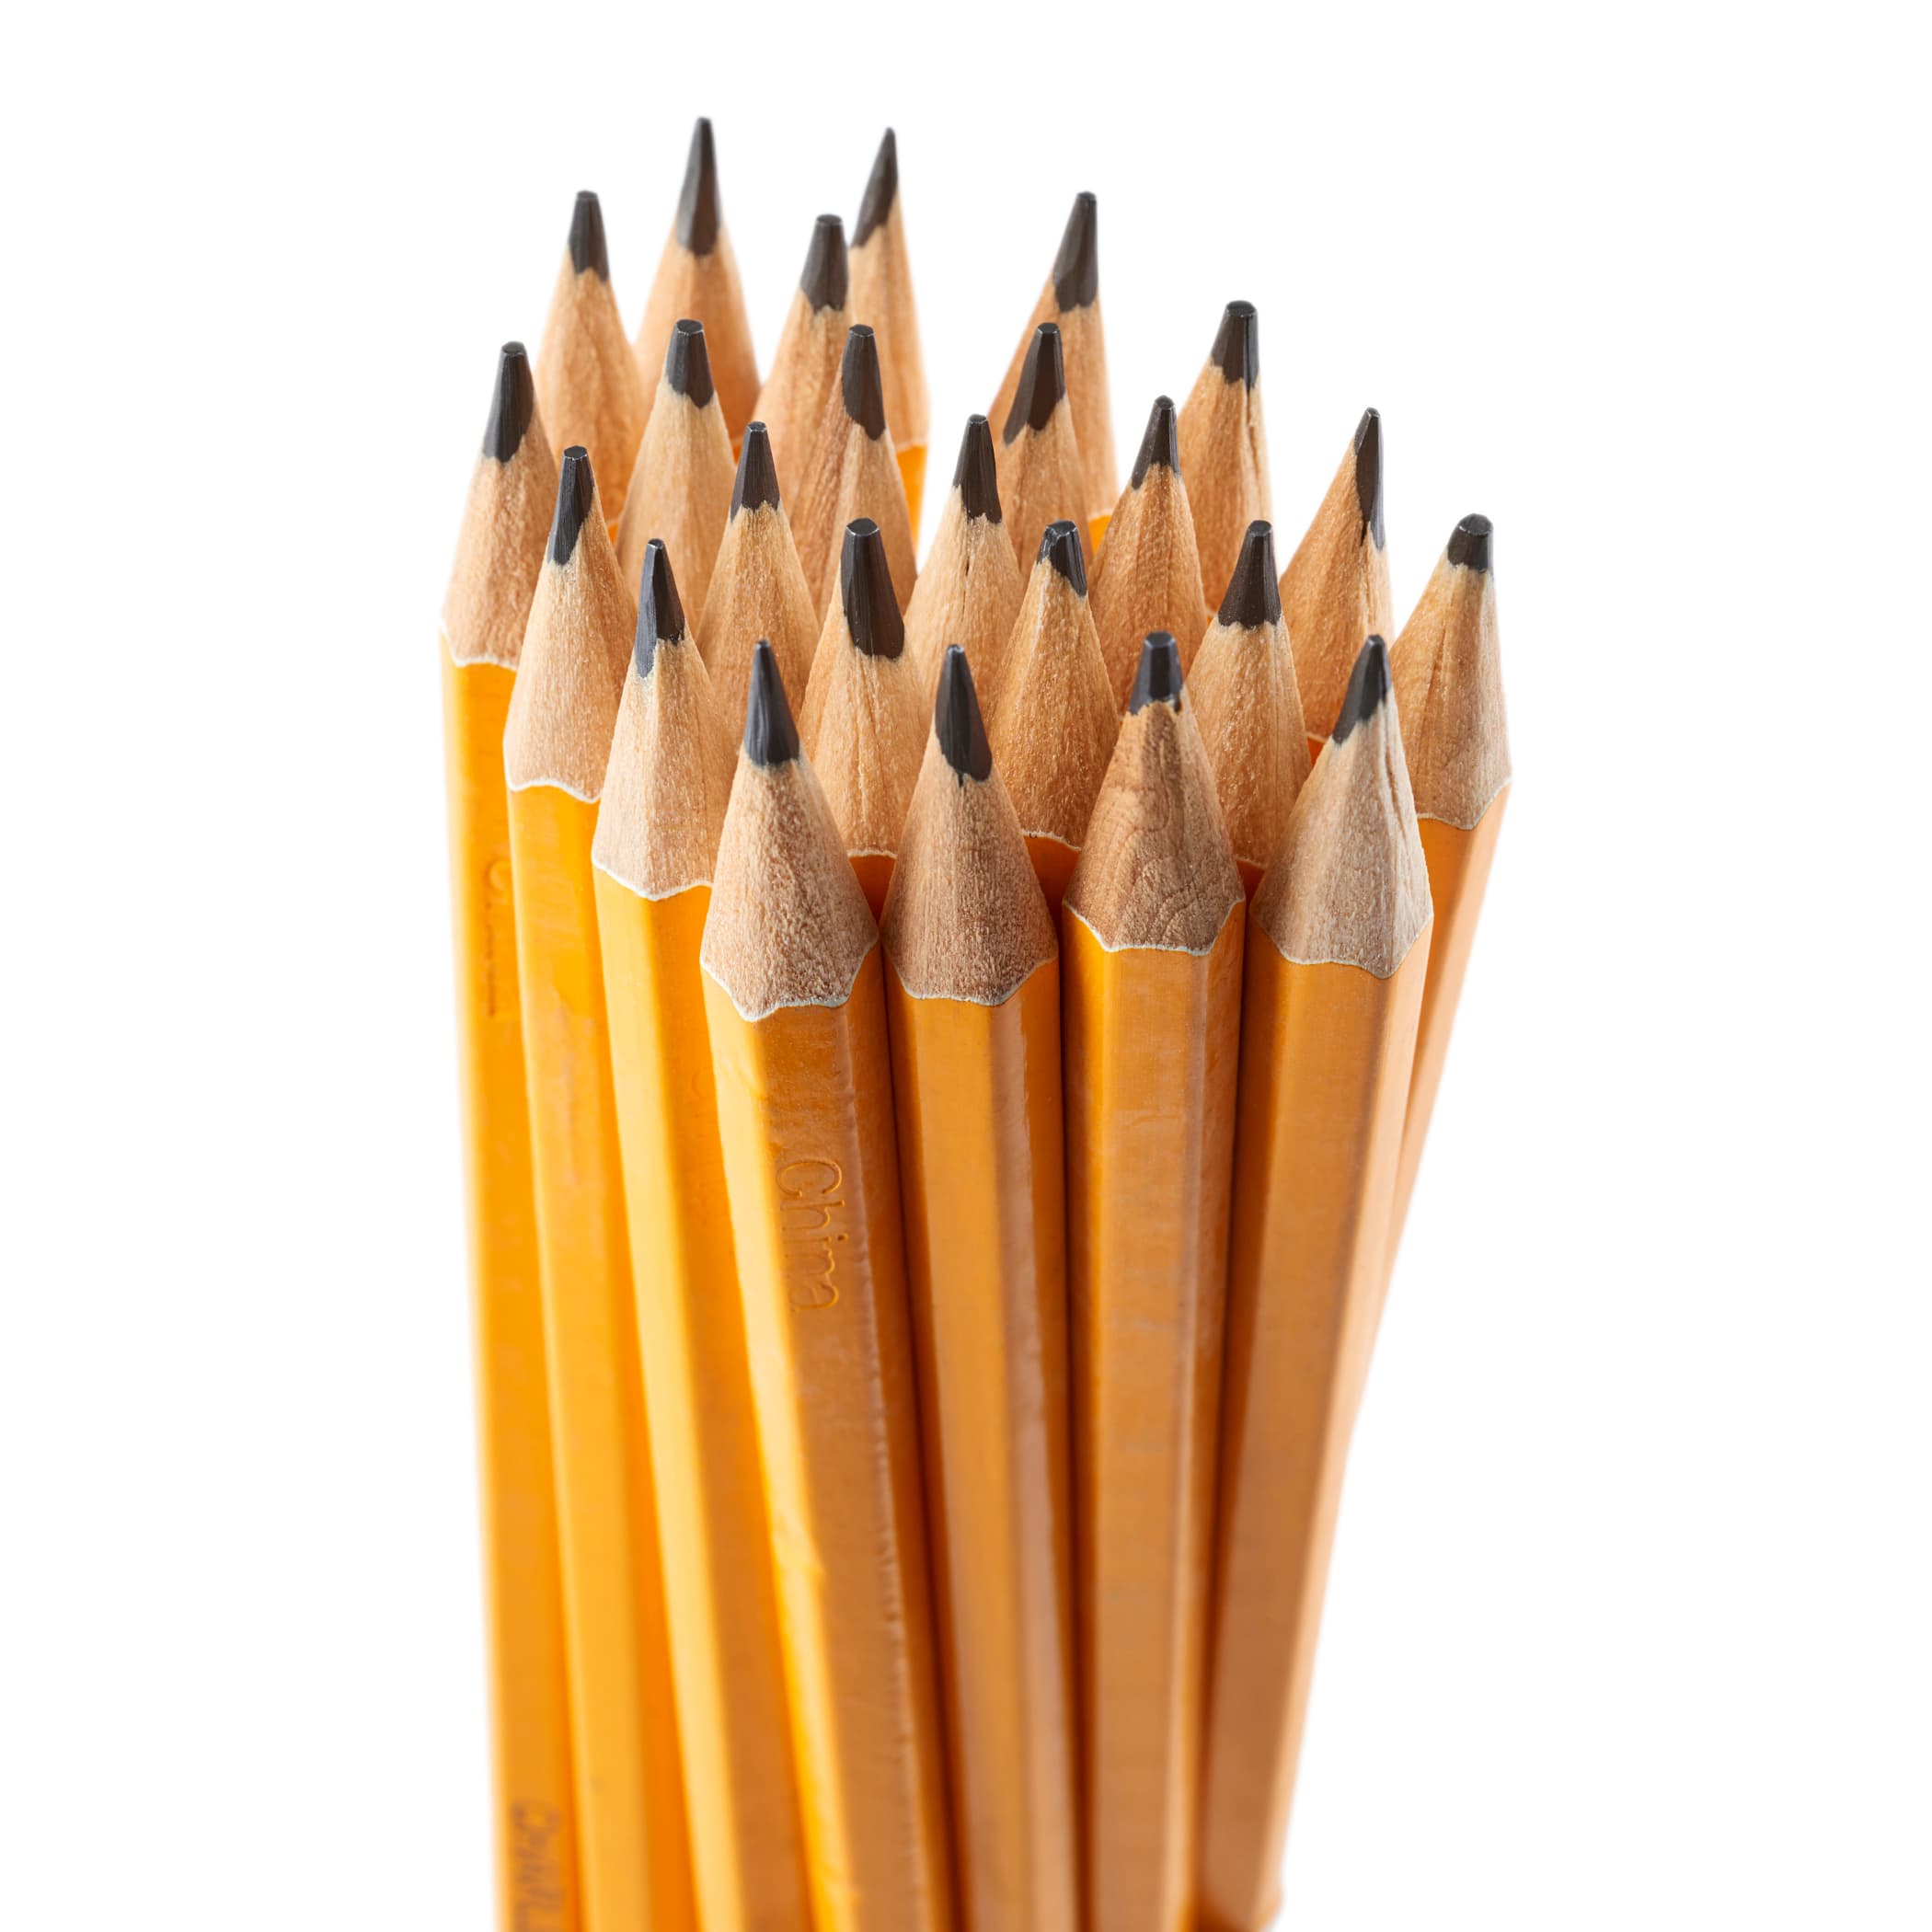 Charles Leonard No. 2 Pencil with Eraser, Pre-Sharpened, Yellow - 12 Per Pack, 12 Packs